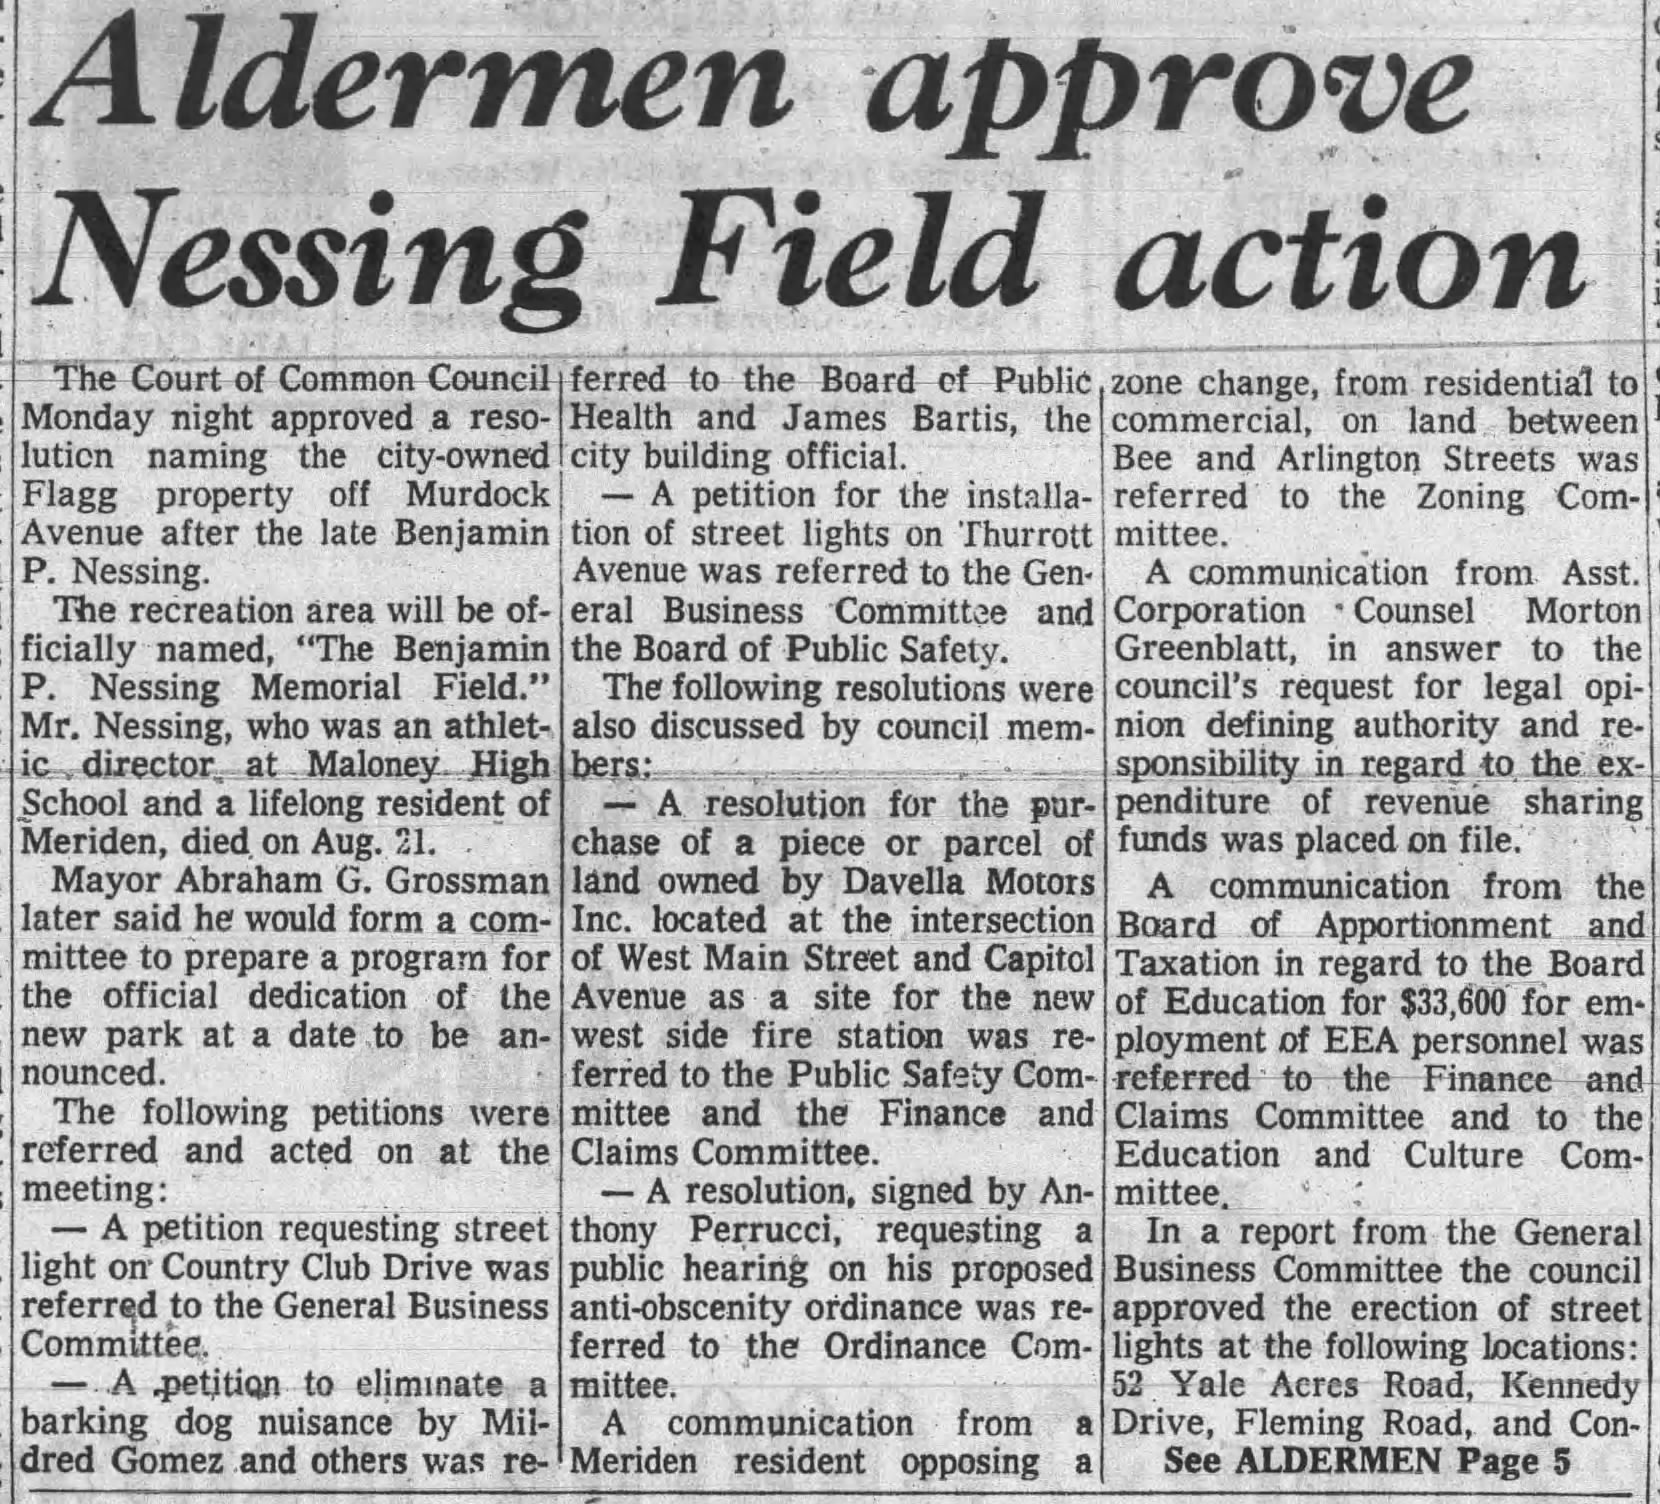 Alderman approve Nessing Field Action